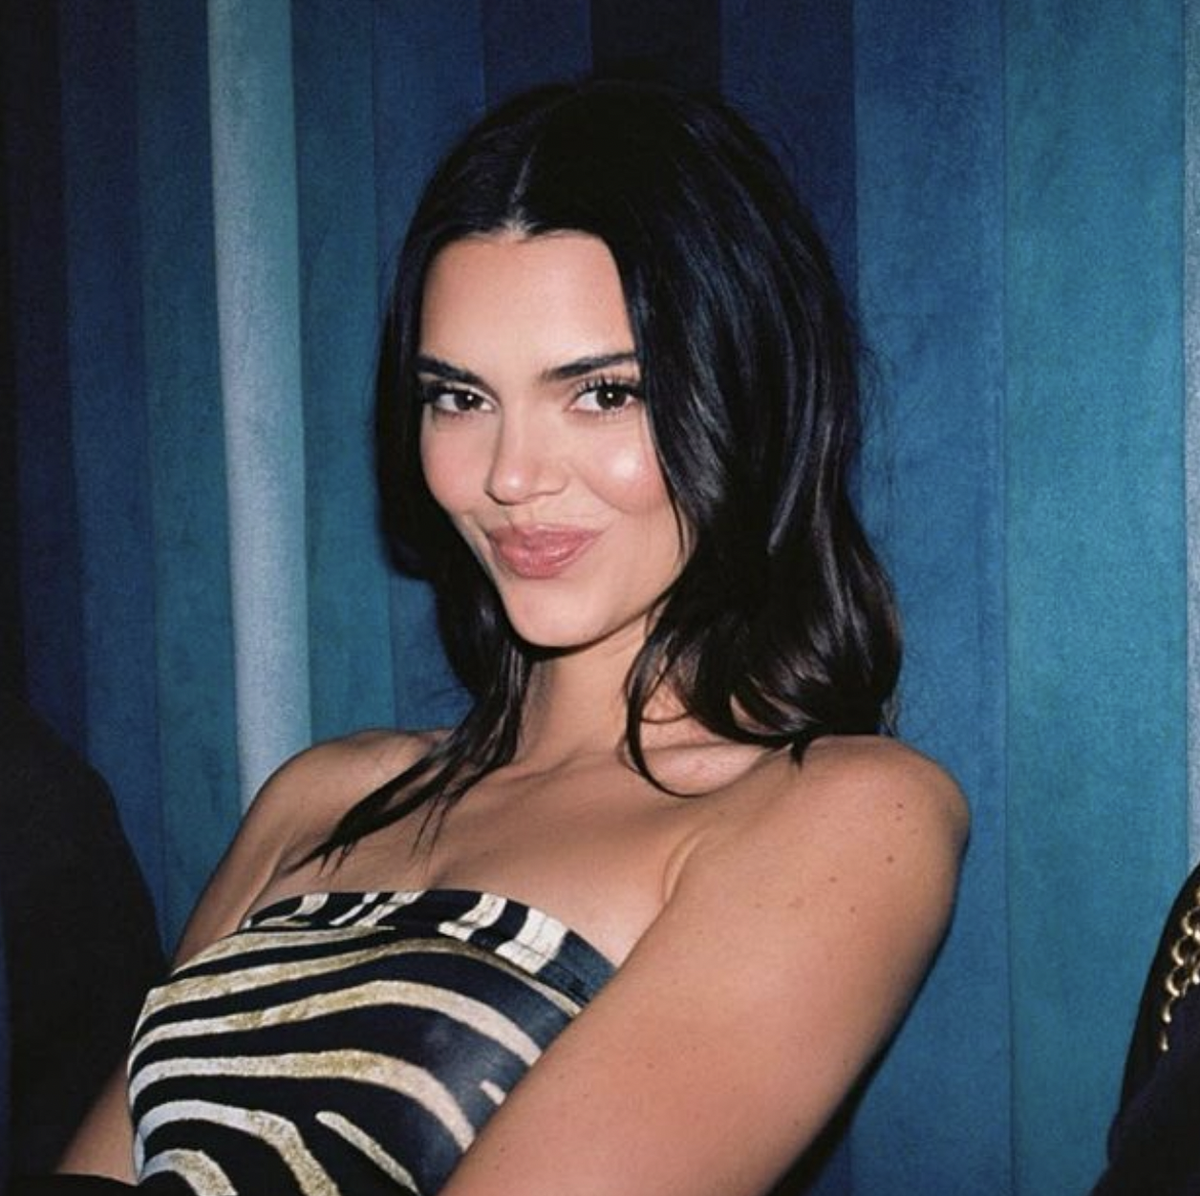 Kendall Jenner just took side boob to a whole new level